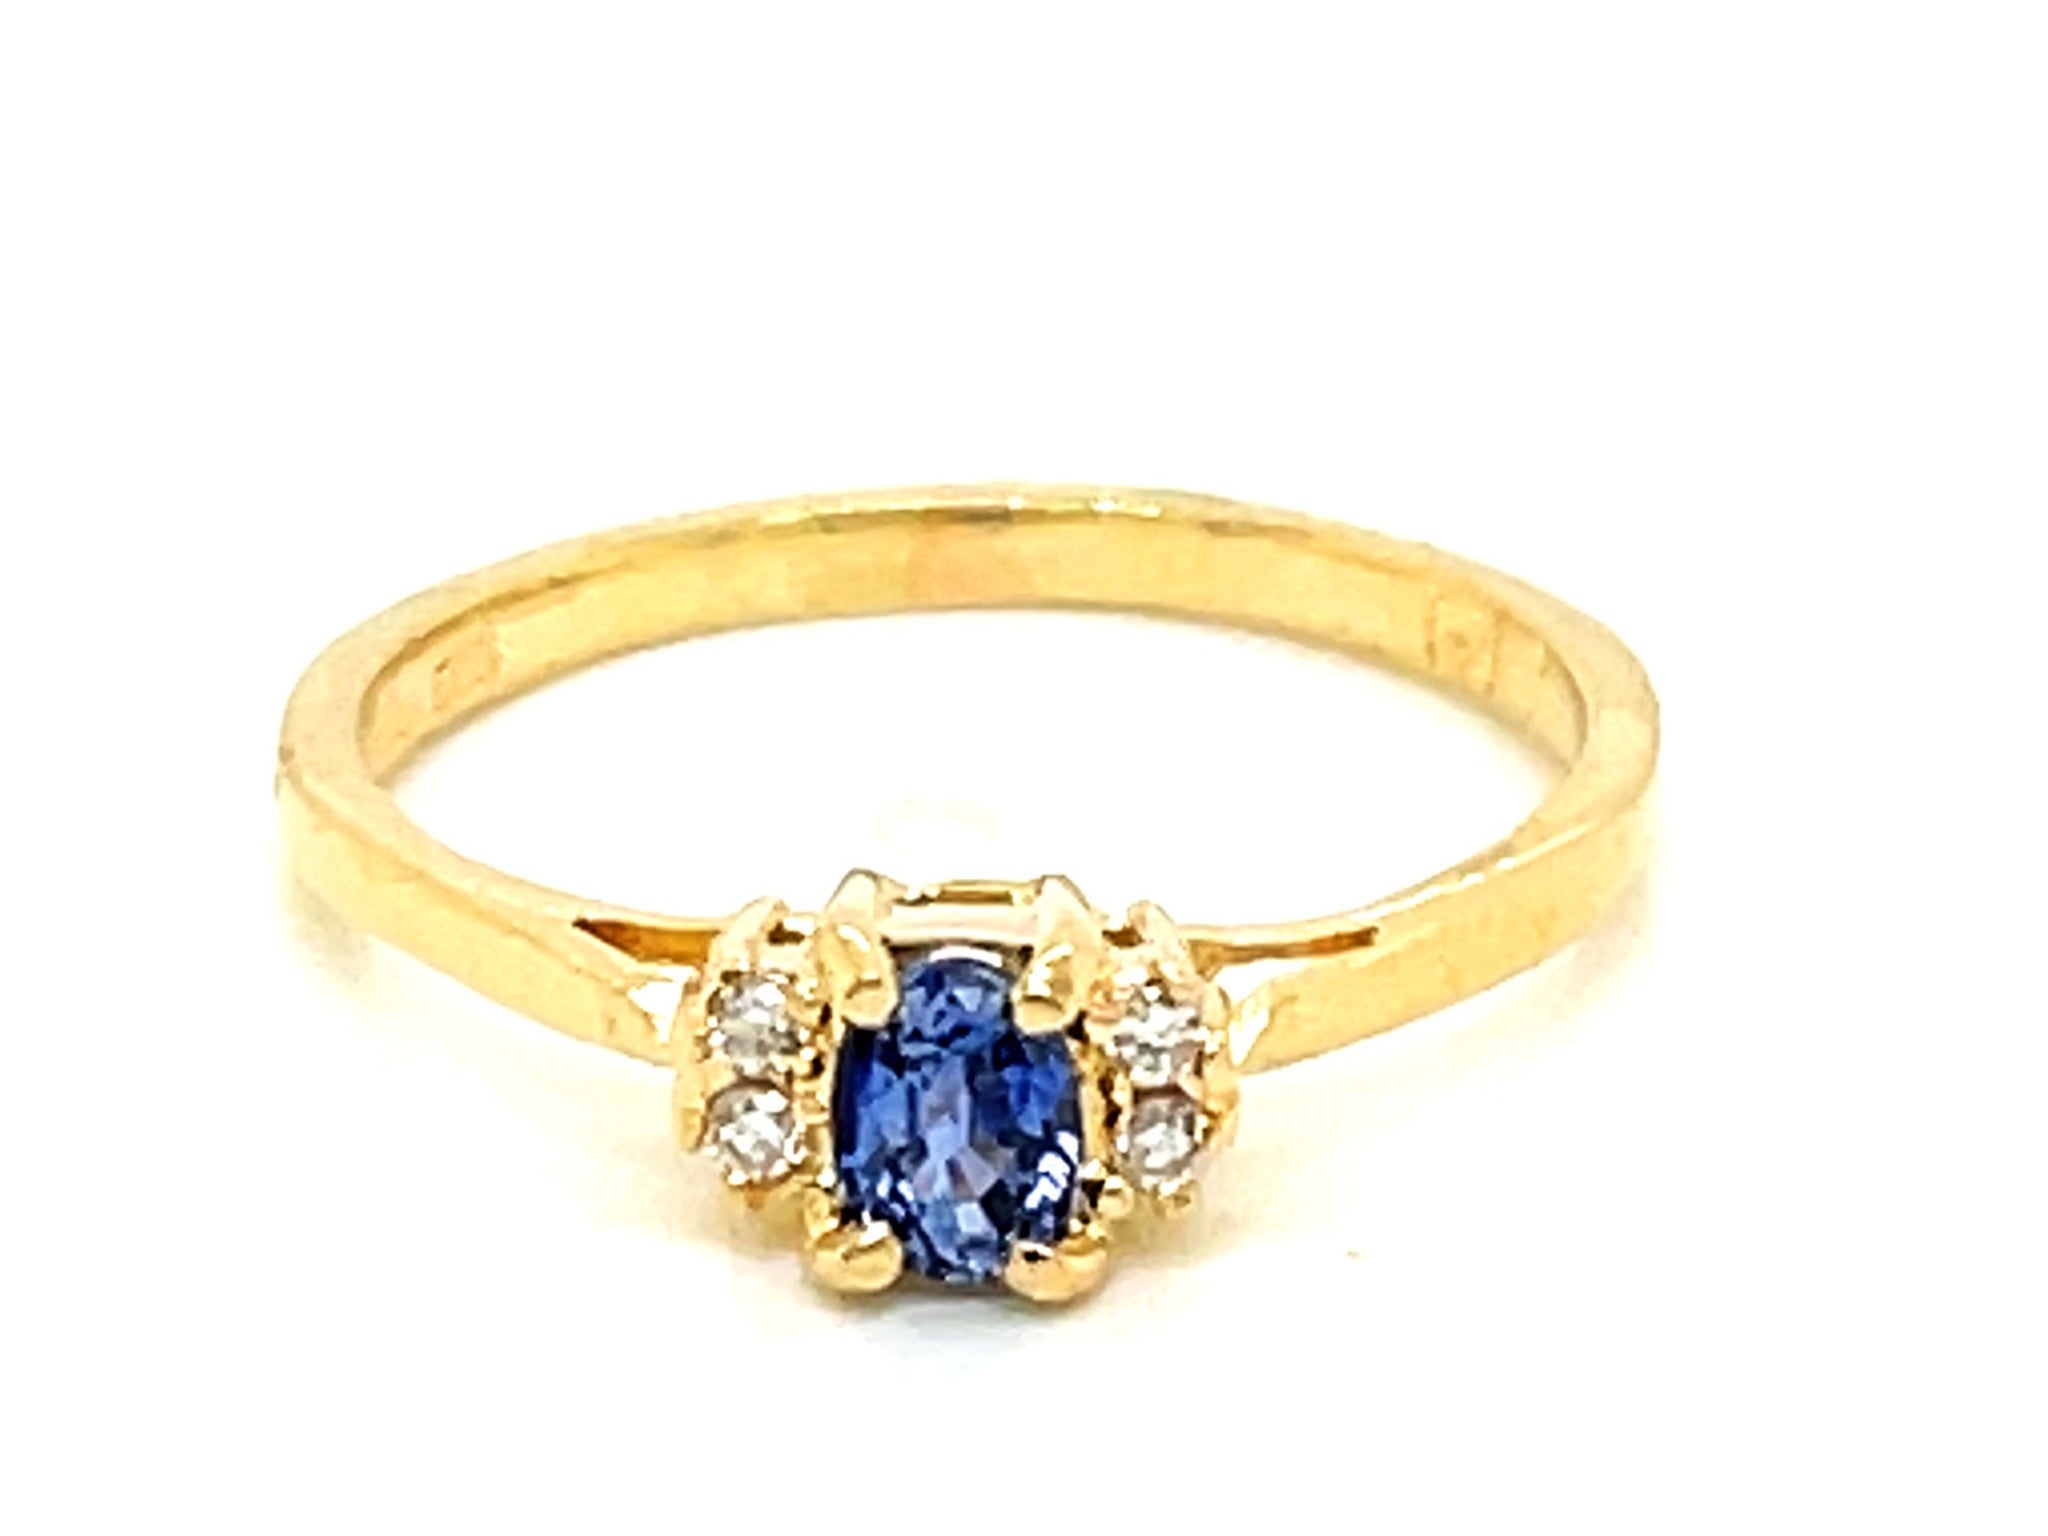 Light Blue Sapphire and Diamond Ring in 14k Yellow Gold